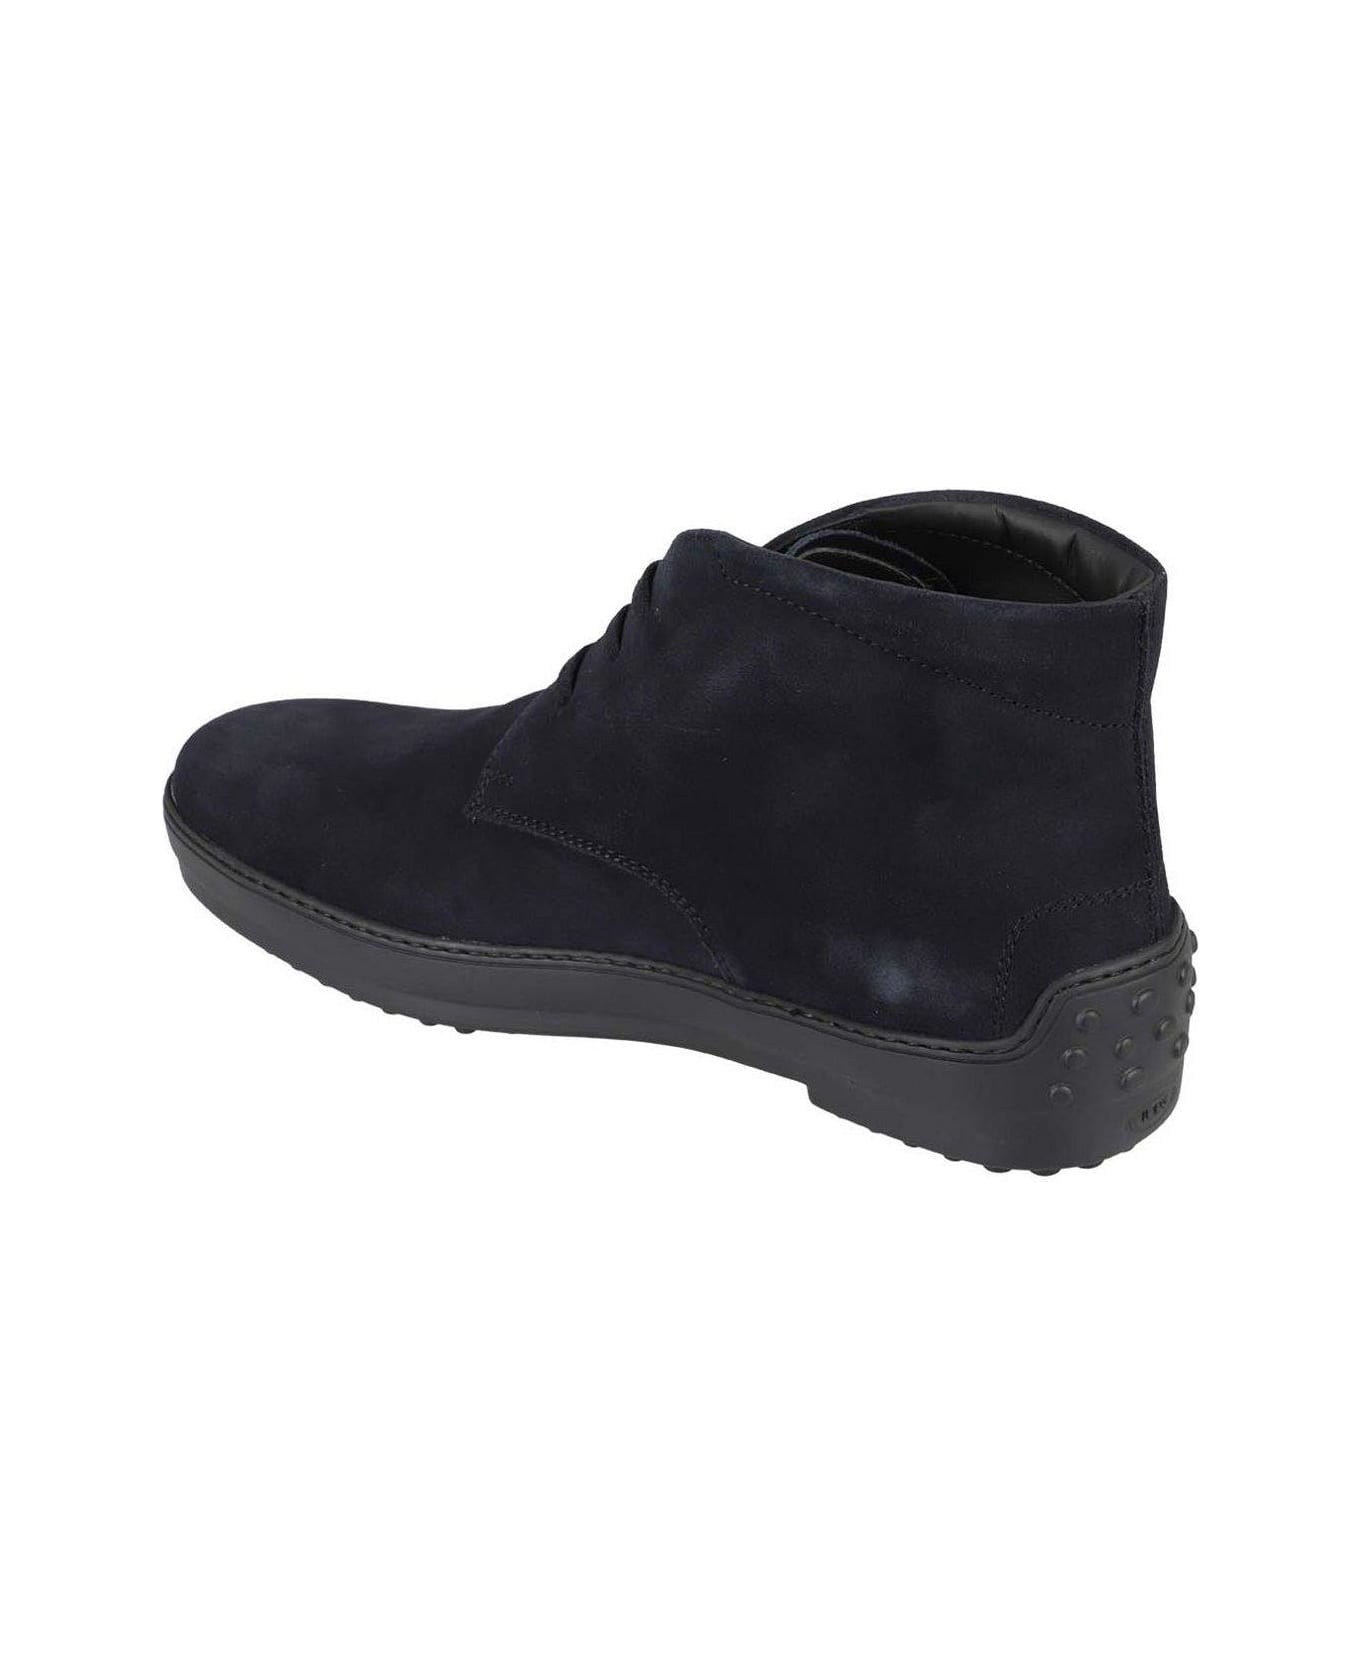 Tod's Gommino Desert Lace-up Boots - NAVY